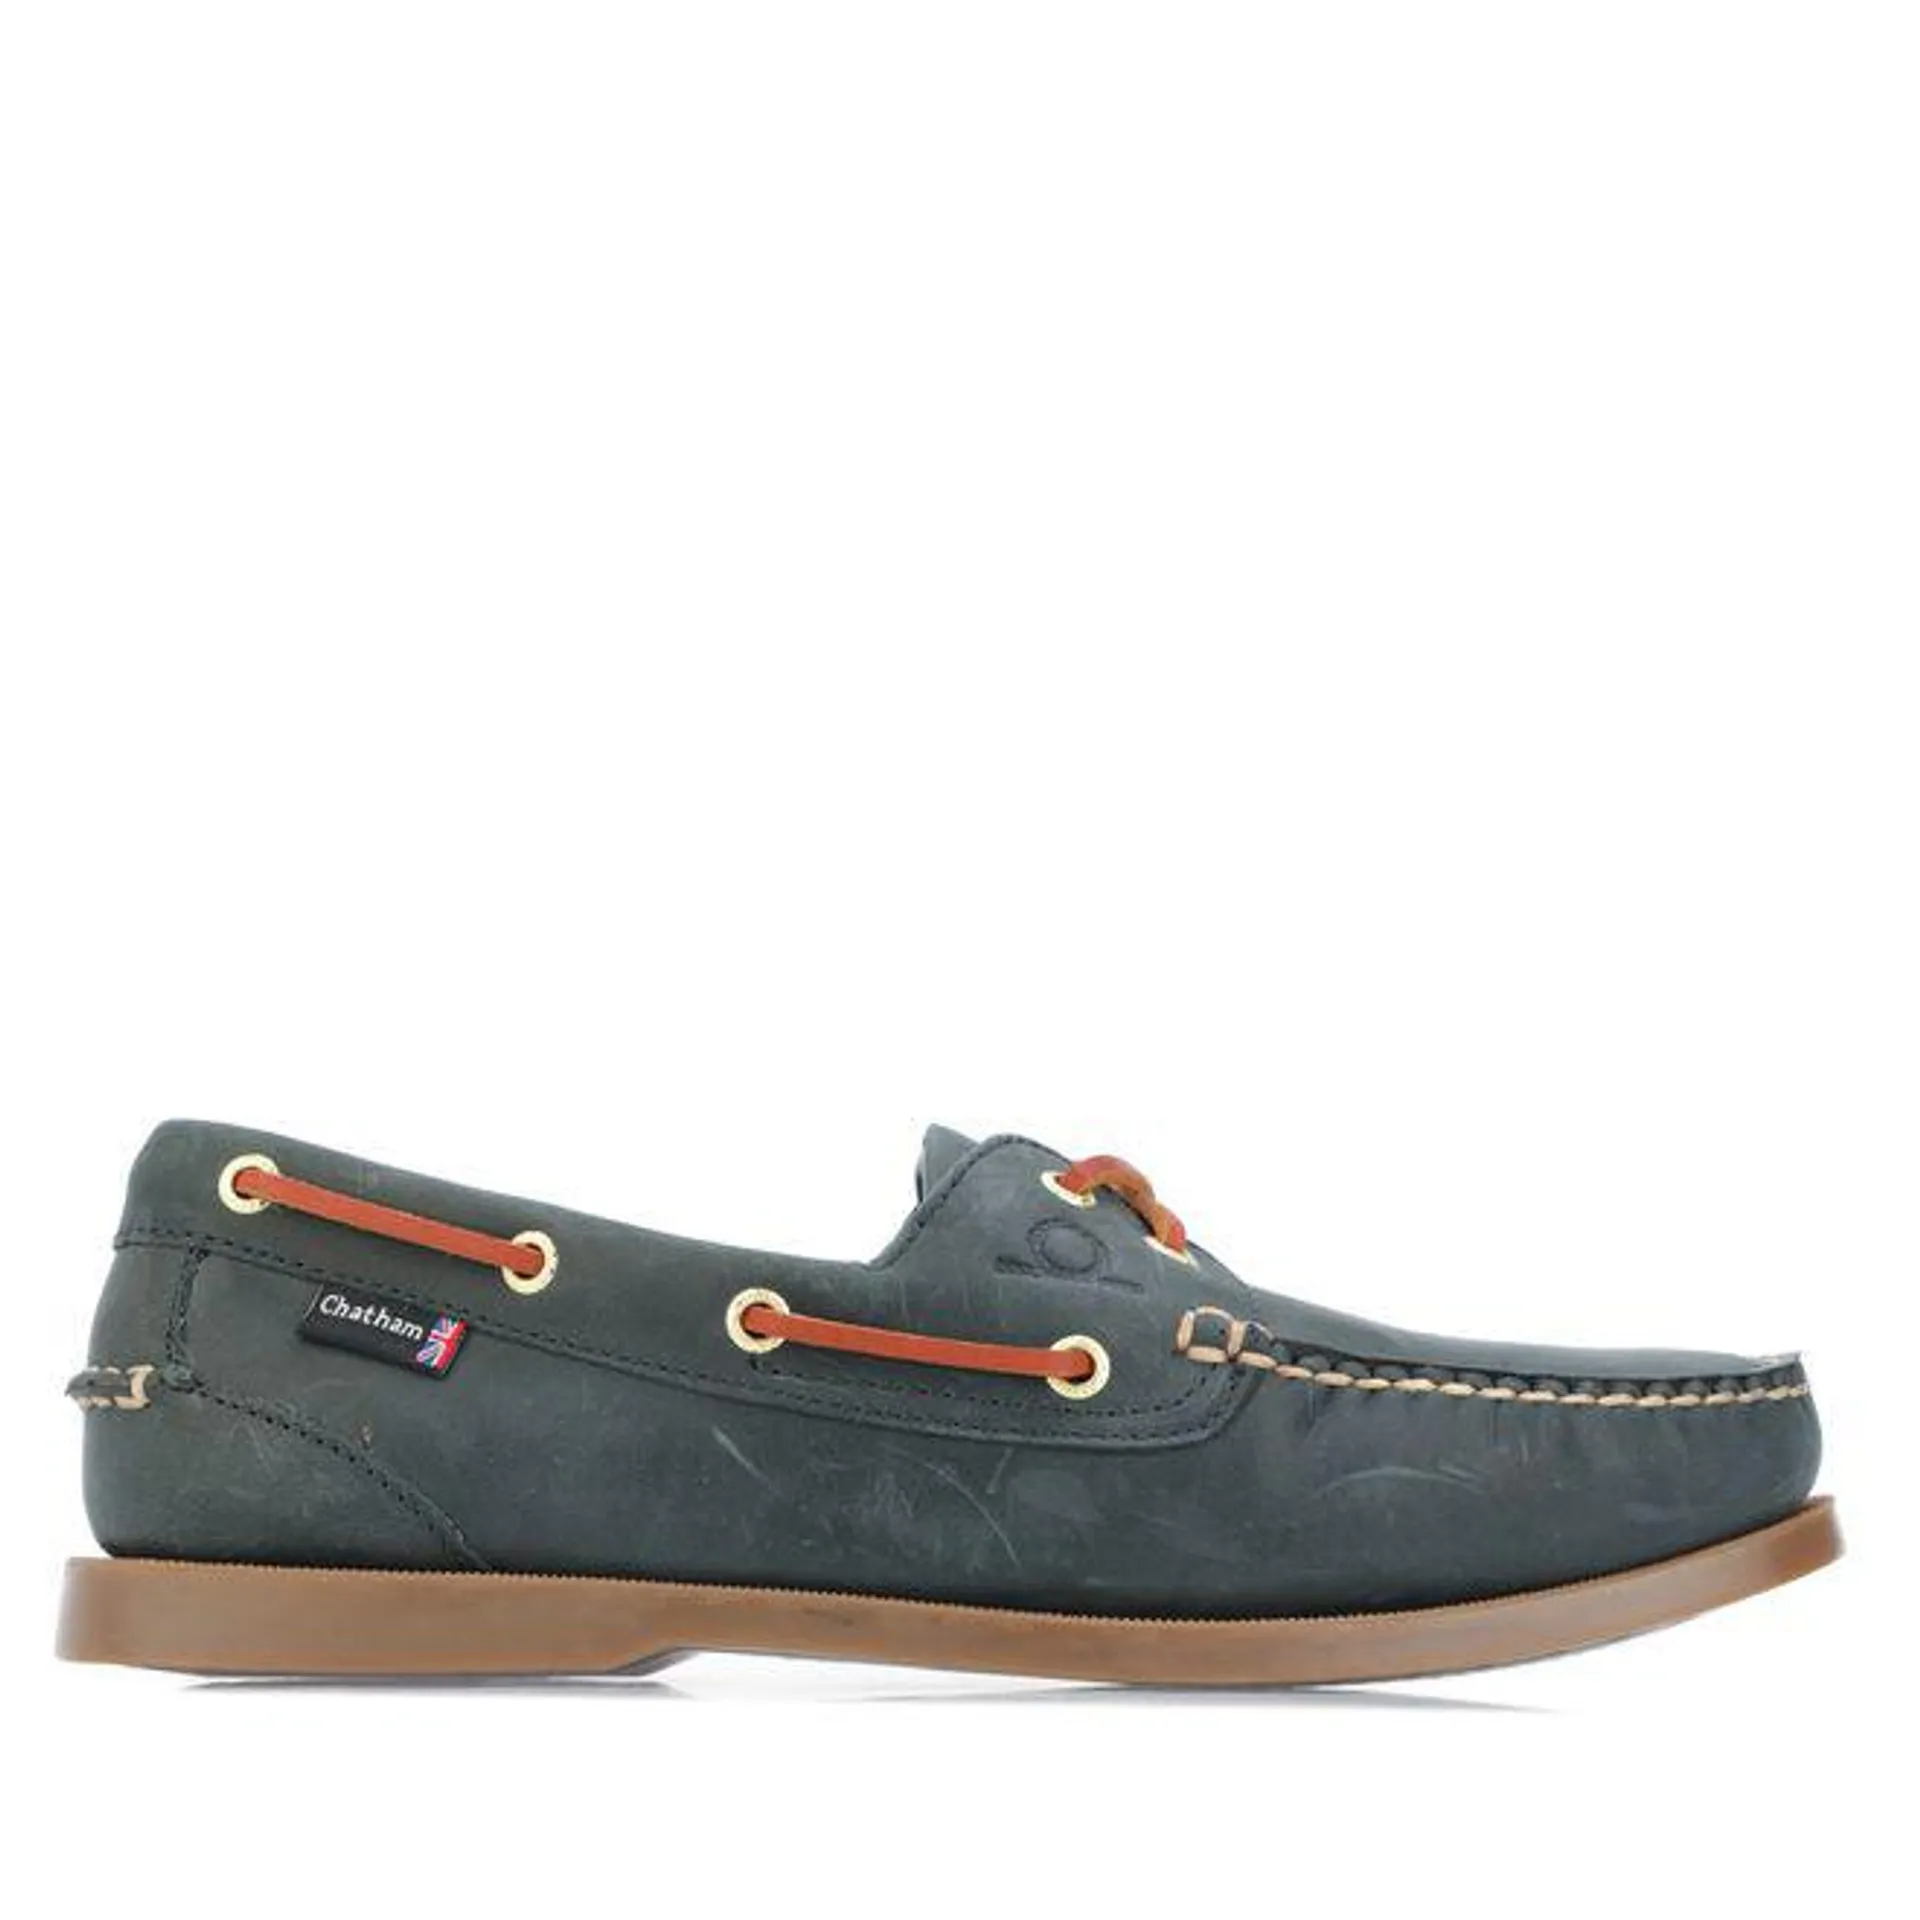 Chatham Mens Deck II G2 Premium Leather Boat Shoes in Blue